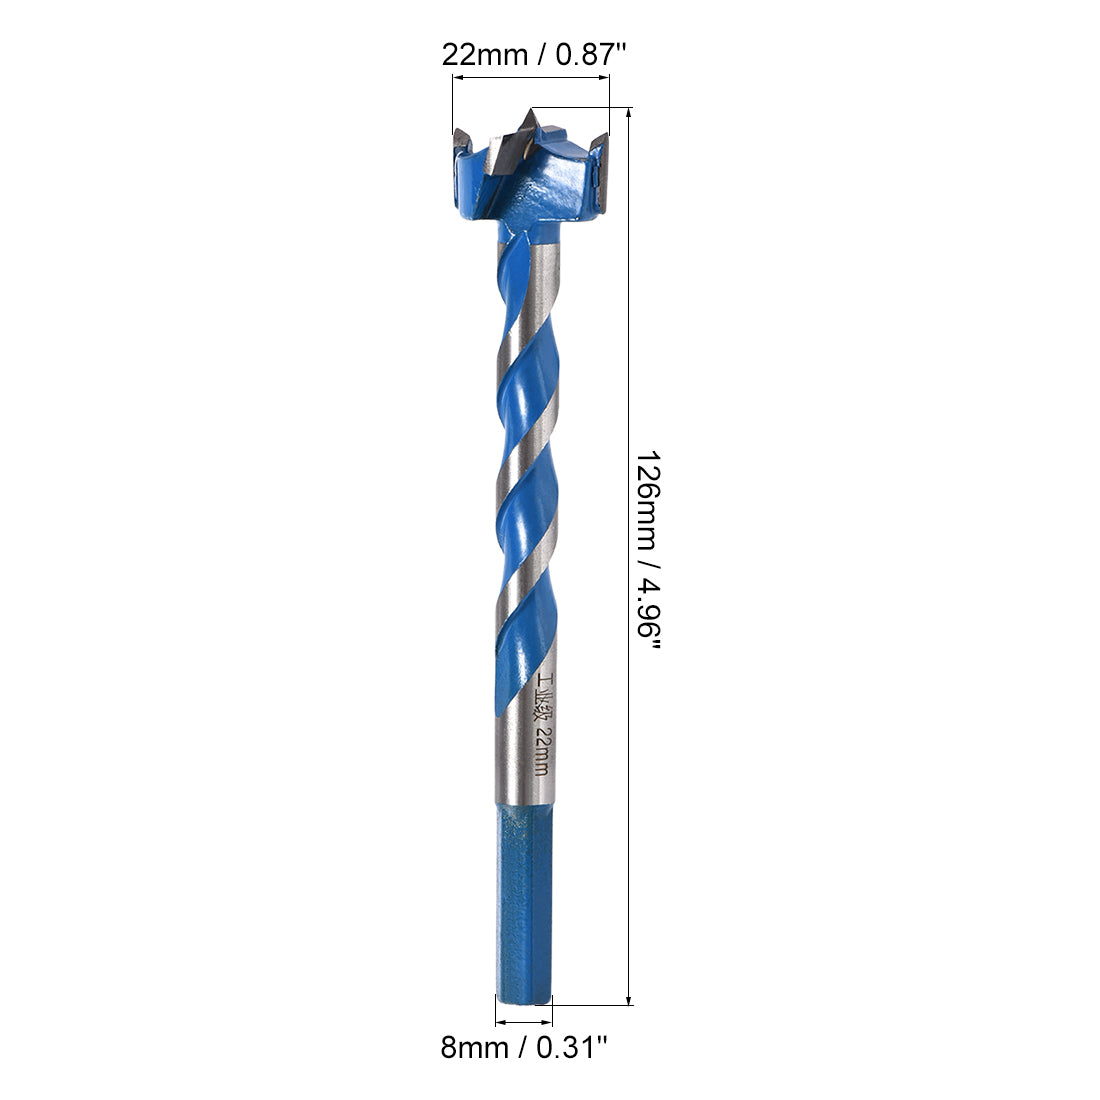 uxcell Uxcell Forstner Wood Boring Drill Bit 22mm Dia. Hole Saw Carbide Alloy Steel Tip Hex Shank Cutting for Hinge Plywood Wood Tool Blue